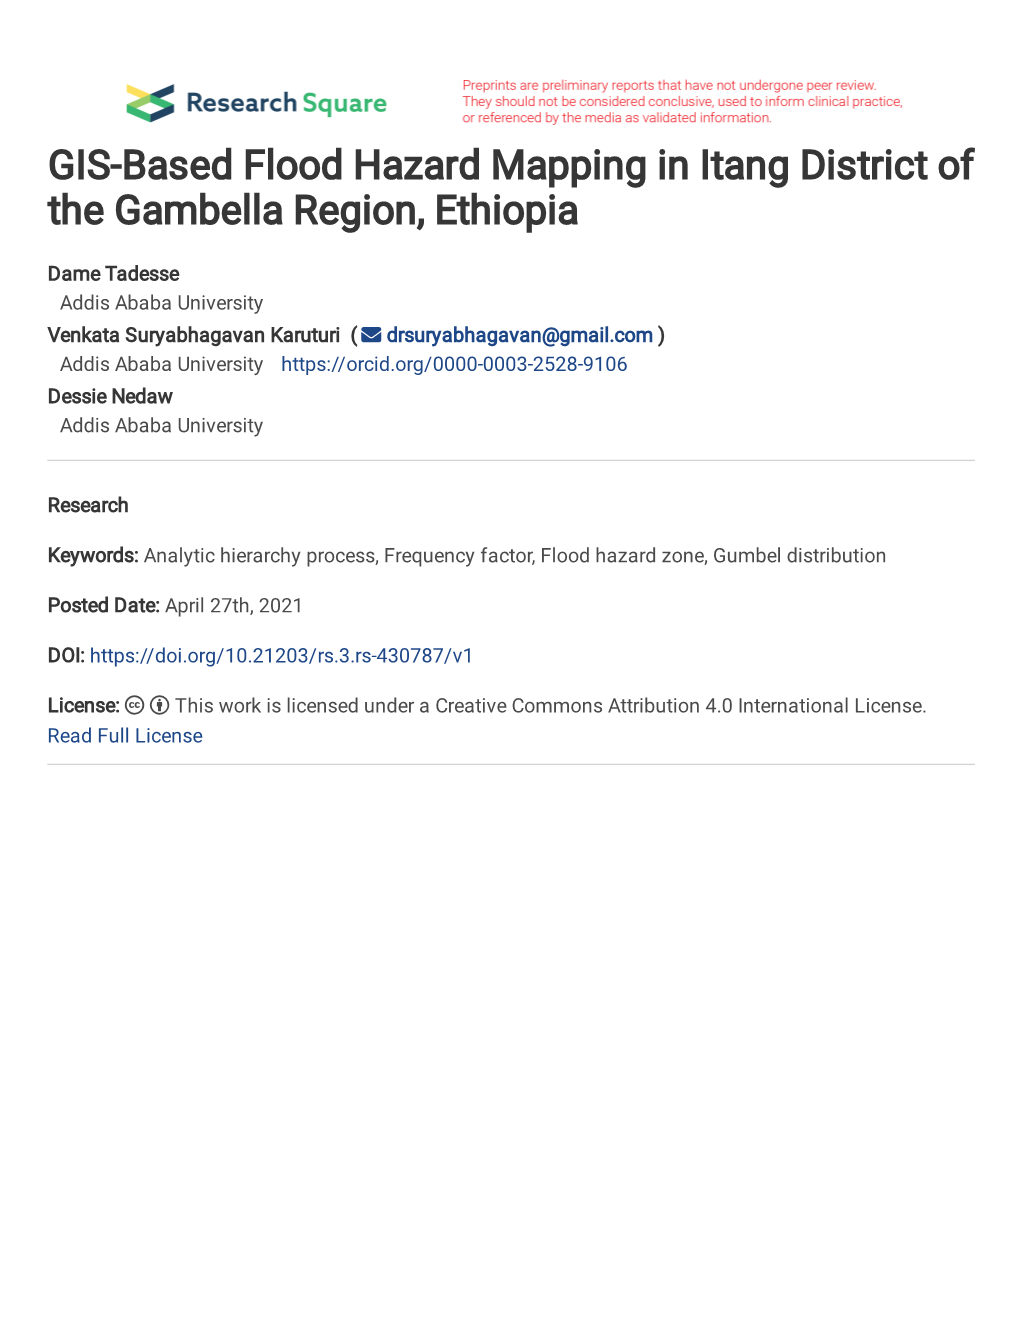 1 GIS-Based Flood Hazard Mapping in Itang District of the Gambella